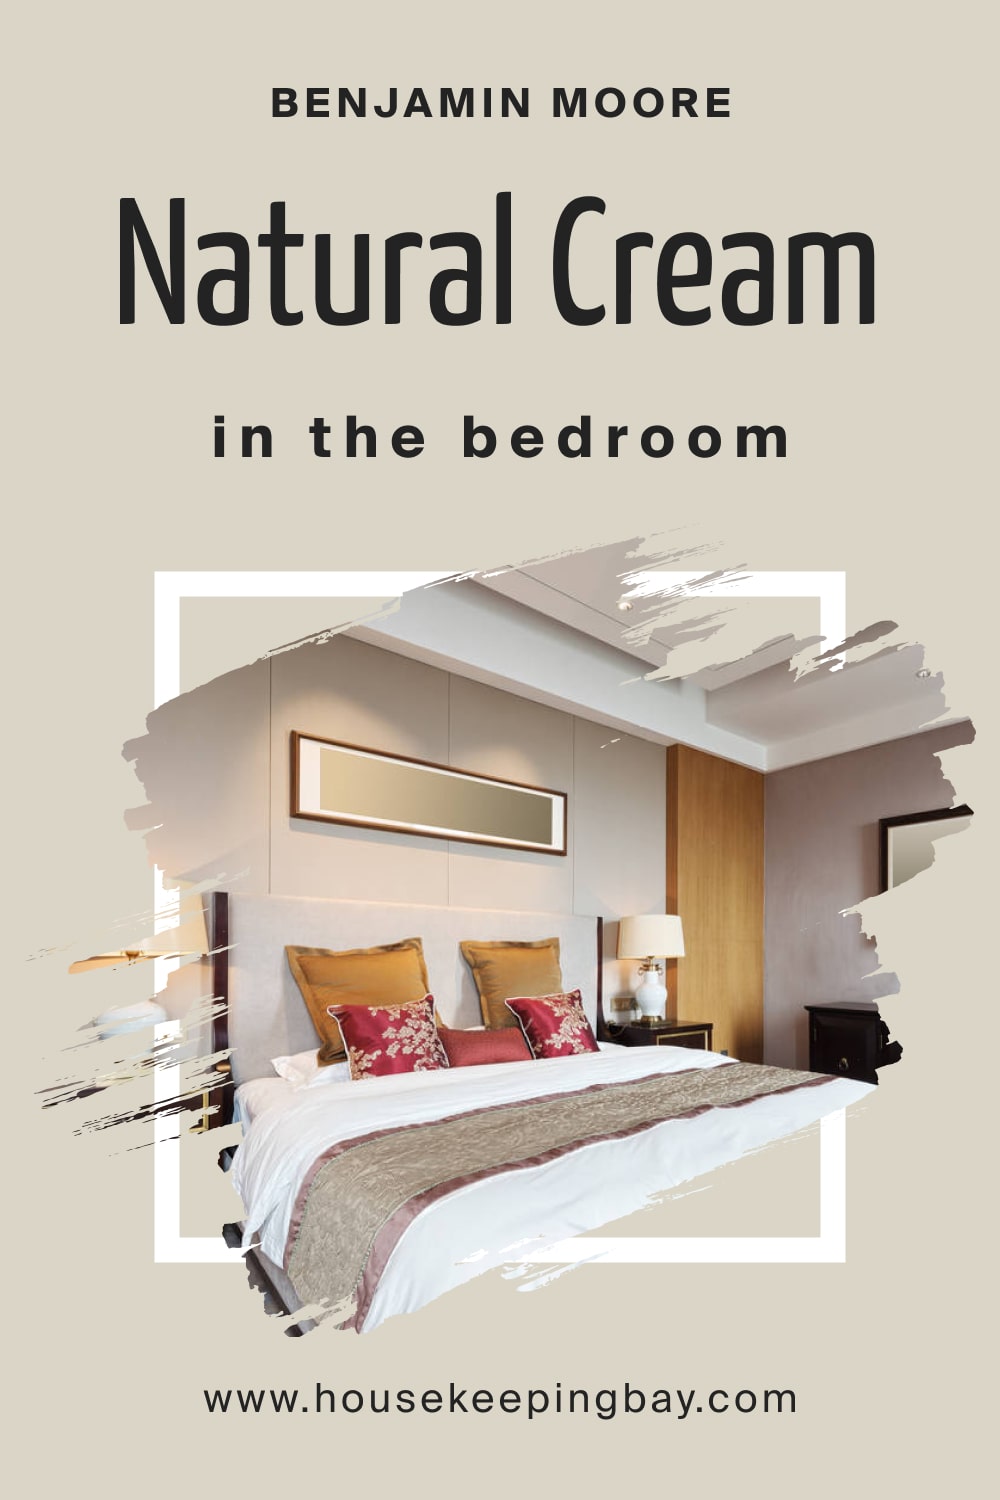 Sherwin Williams. Natural Cream OC 14 For the bedroom